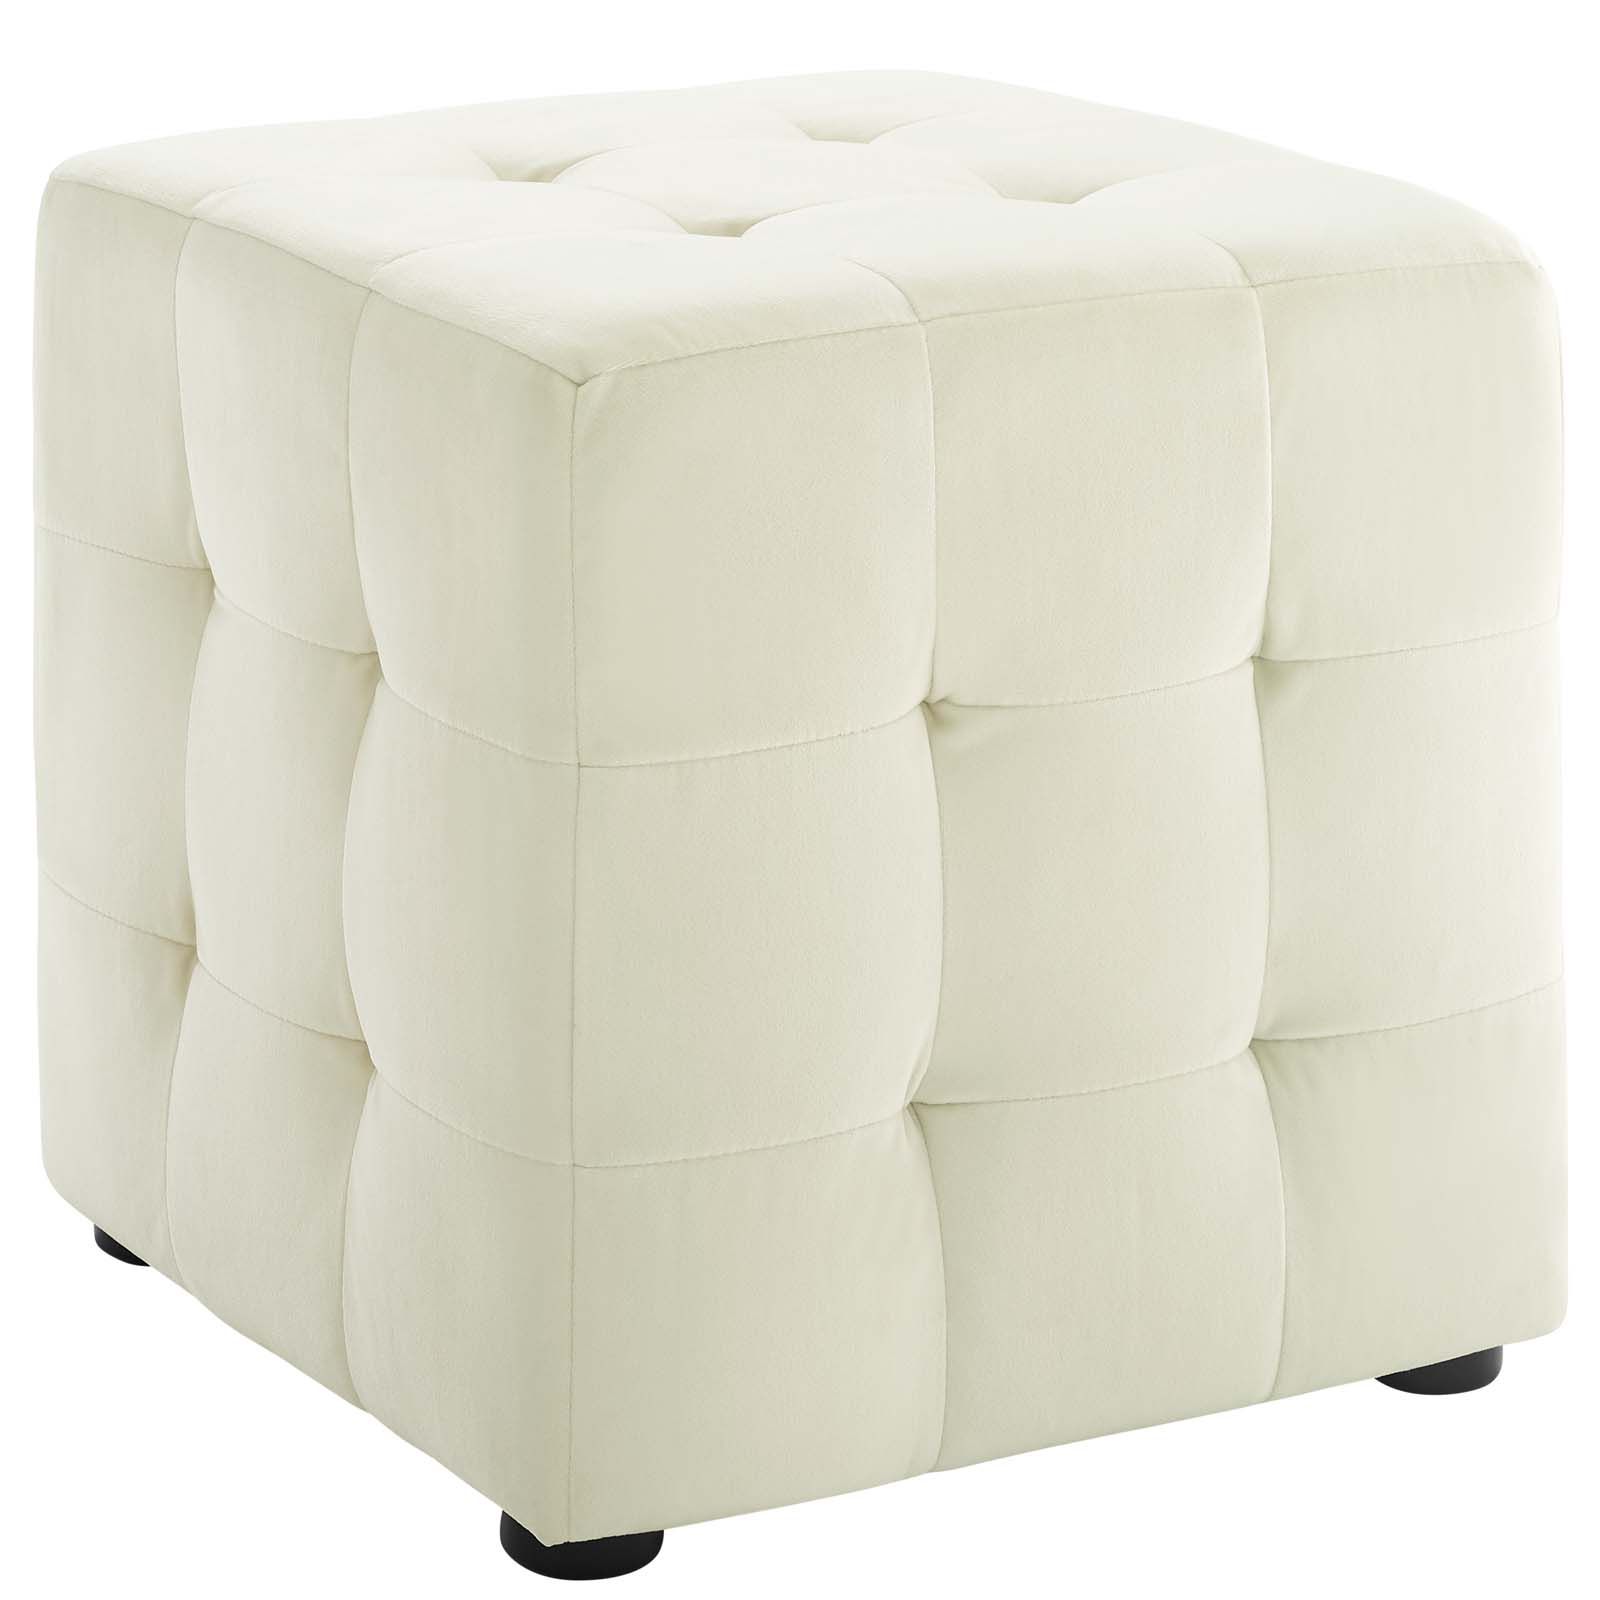 Light Gray Velvet Fabric Accent Ottomans With Widely Used Contemporary Modern Urban Designer Living Room Lounge Club Lobby Accent (View 10 of 10)